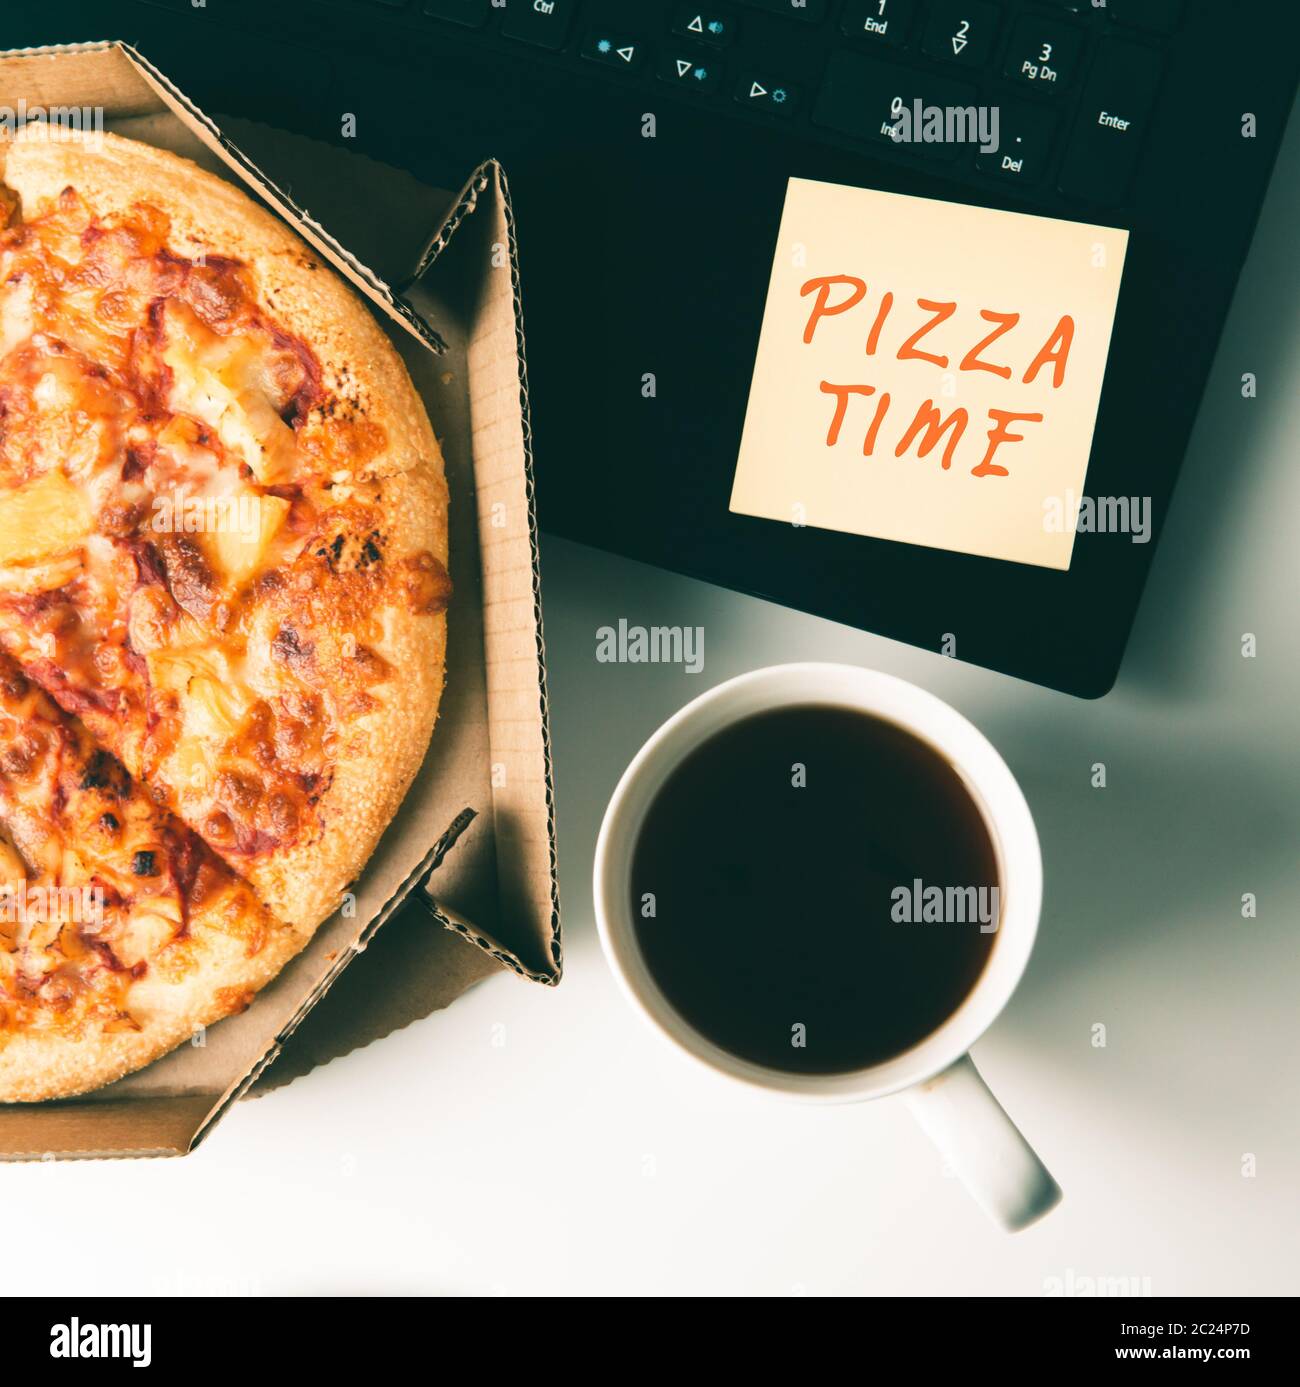 Pizza in box, cup of coffee, laptop and sticker with text PIZZA TIME on desk in office. Concept of food or pizza delivery and break on working day. Stock Photo